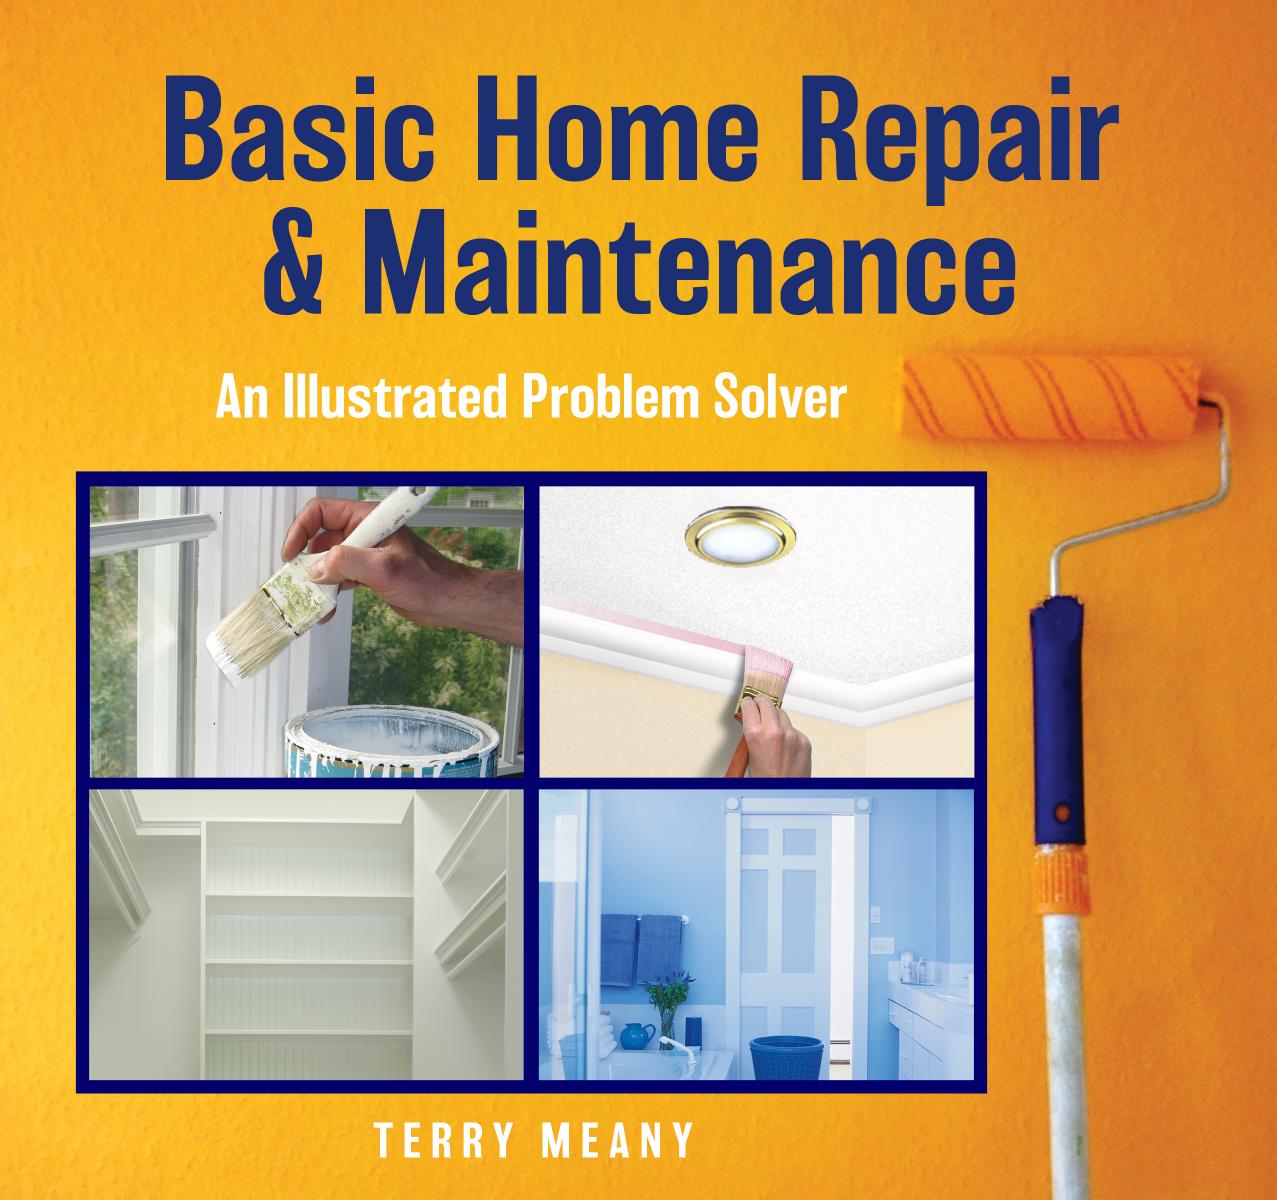 Basic Home Repair & Maintenance by Terry Meany